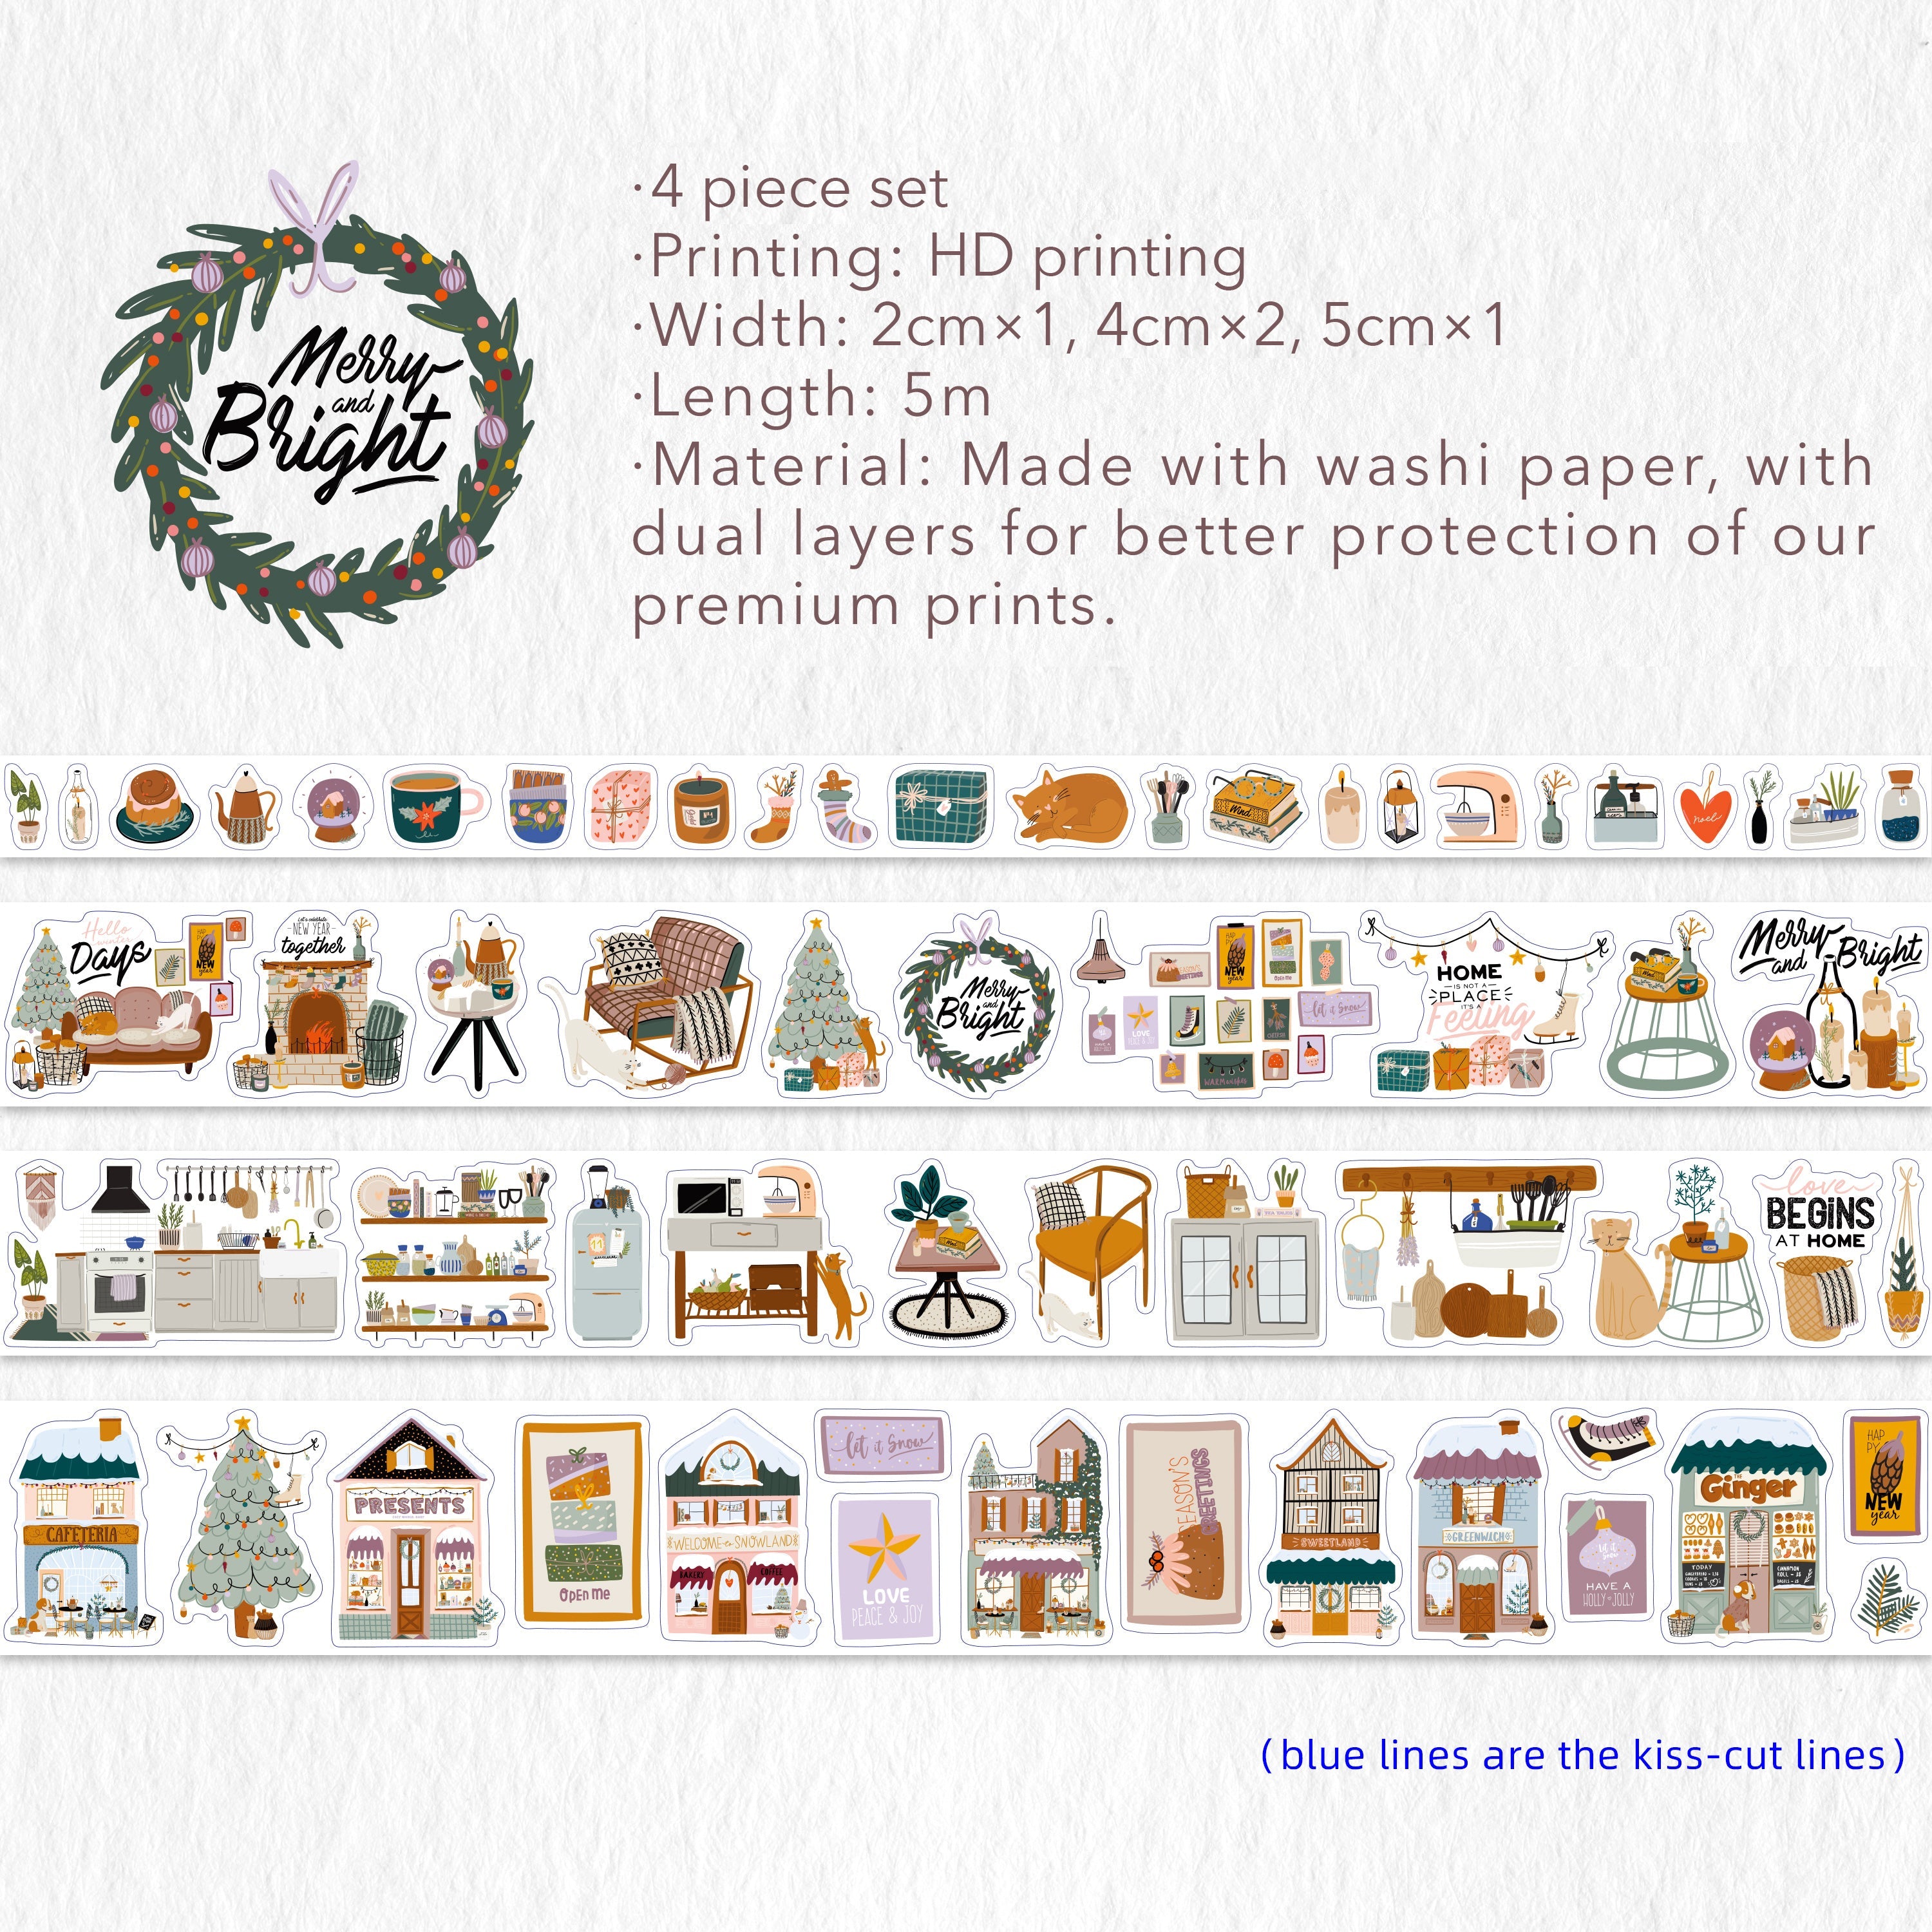  Home Sweet Home Washi Tape Sticker Set by The Washi Tape Shop The Washi Tape Shop Perfumarie